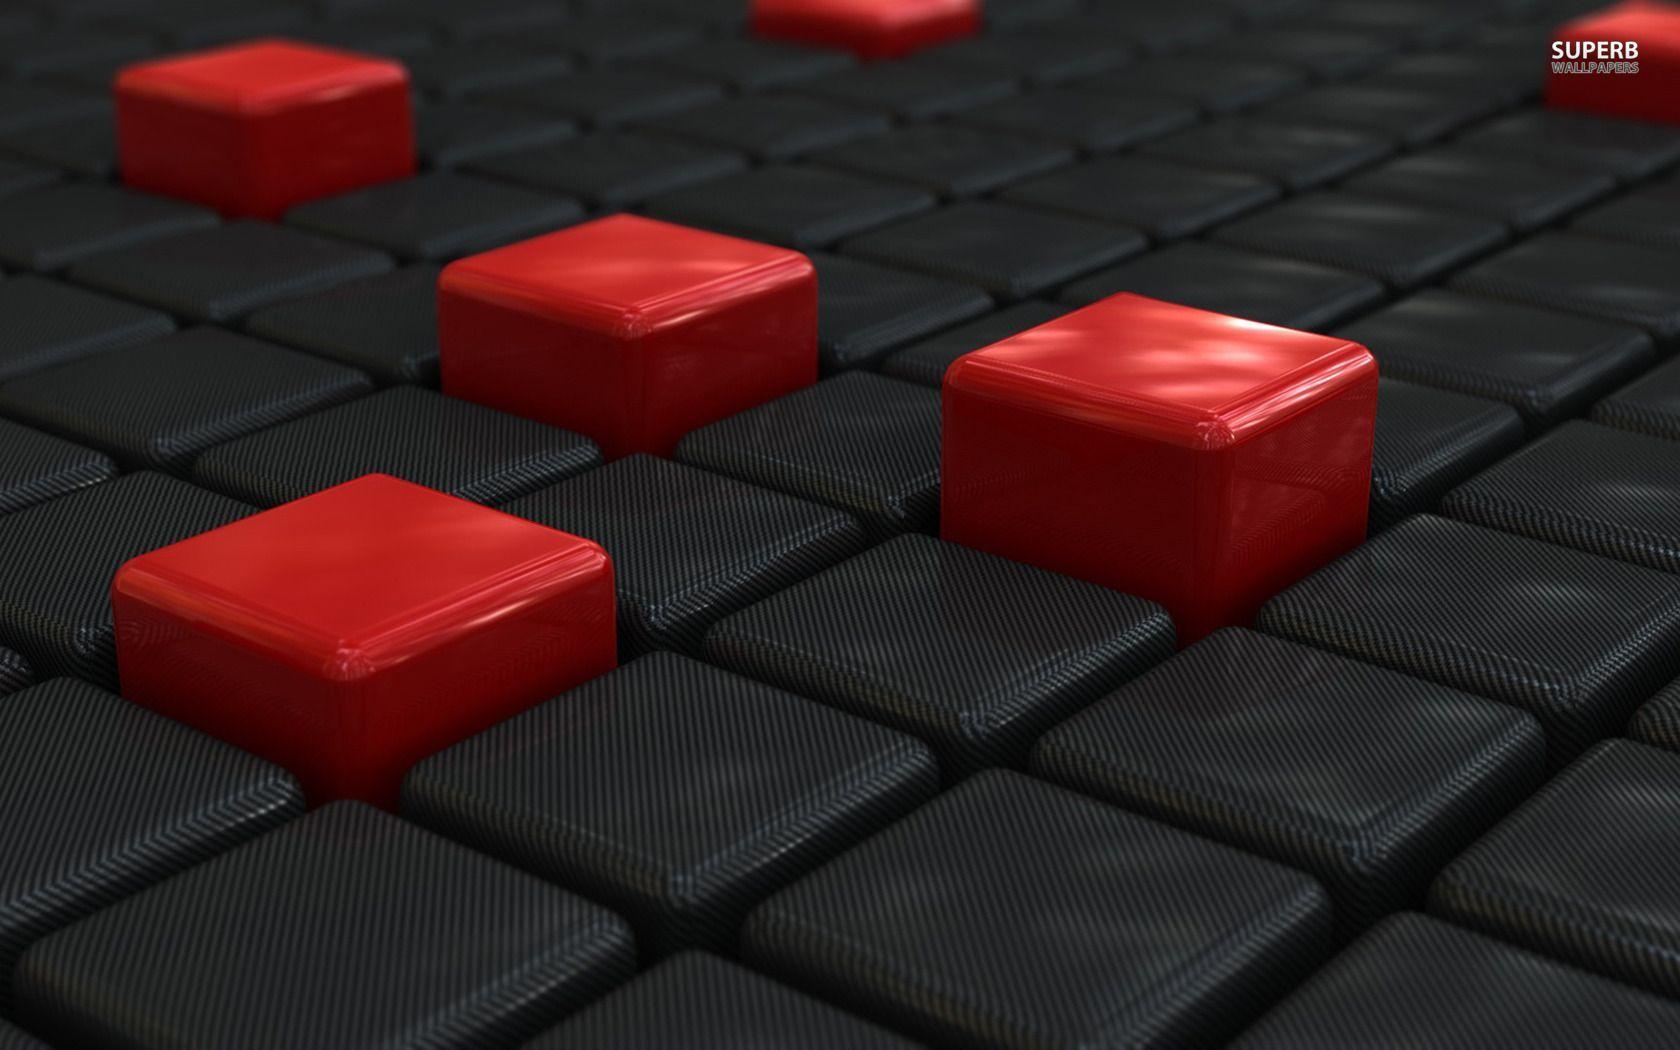 Black & Red Cubes wallpaper wallpaper - RED AND BLACK